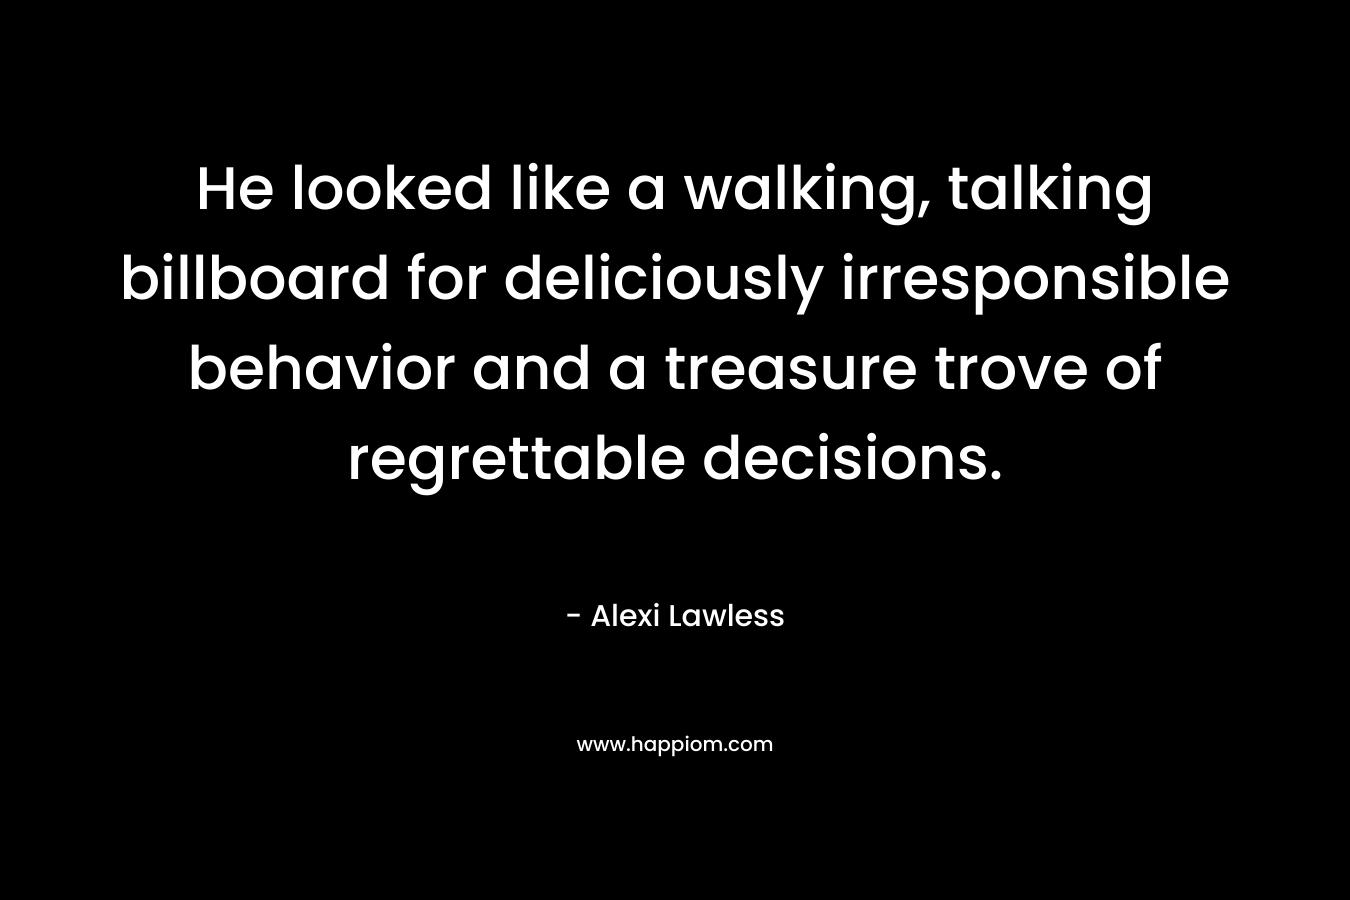 He looked like a walking, talking billboard for deliciously irresponsible behavior and a treasure trove of regrettable decisions. – Alexi Lawless